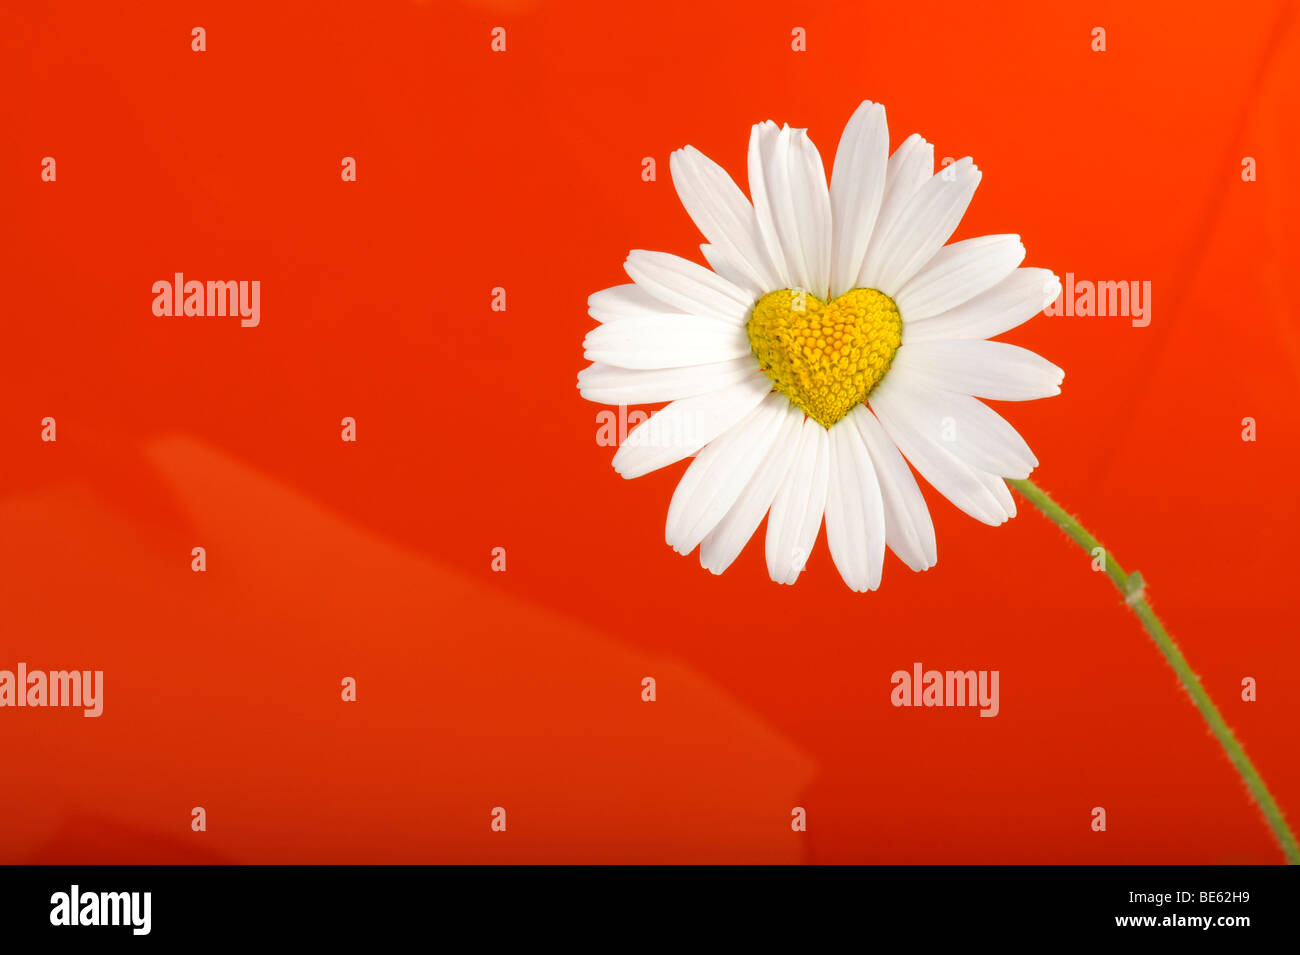 Daisy (Leucanthemum) with disc flowers in heart shape Stock Photo